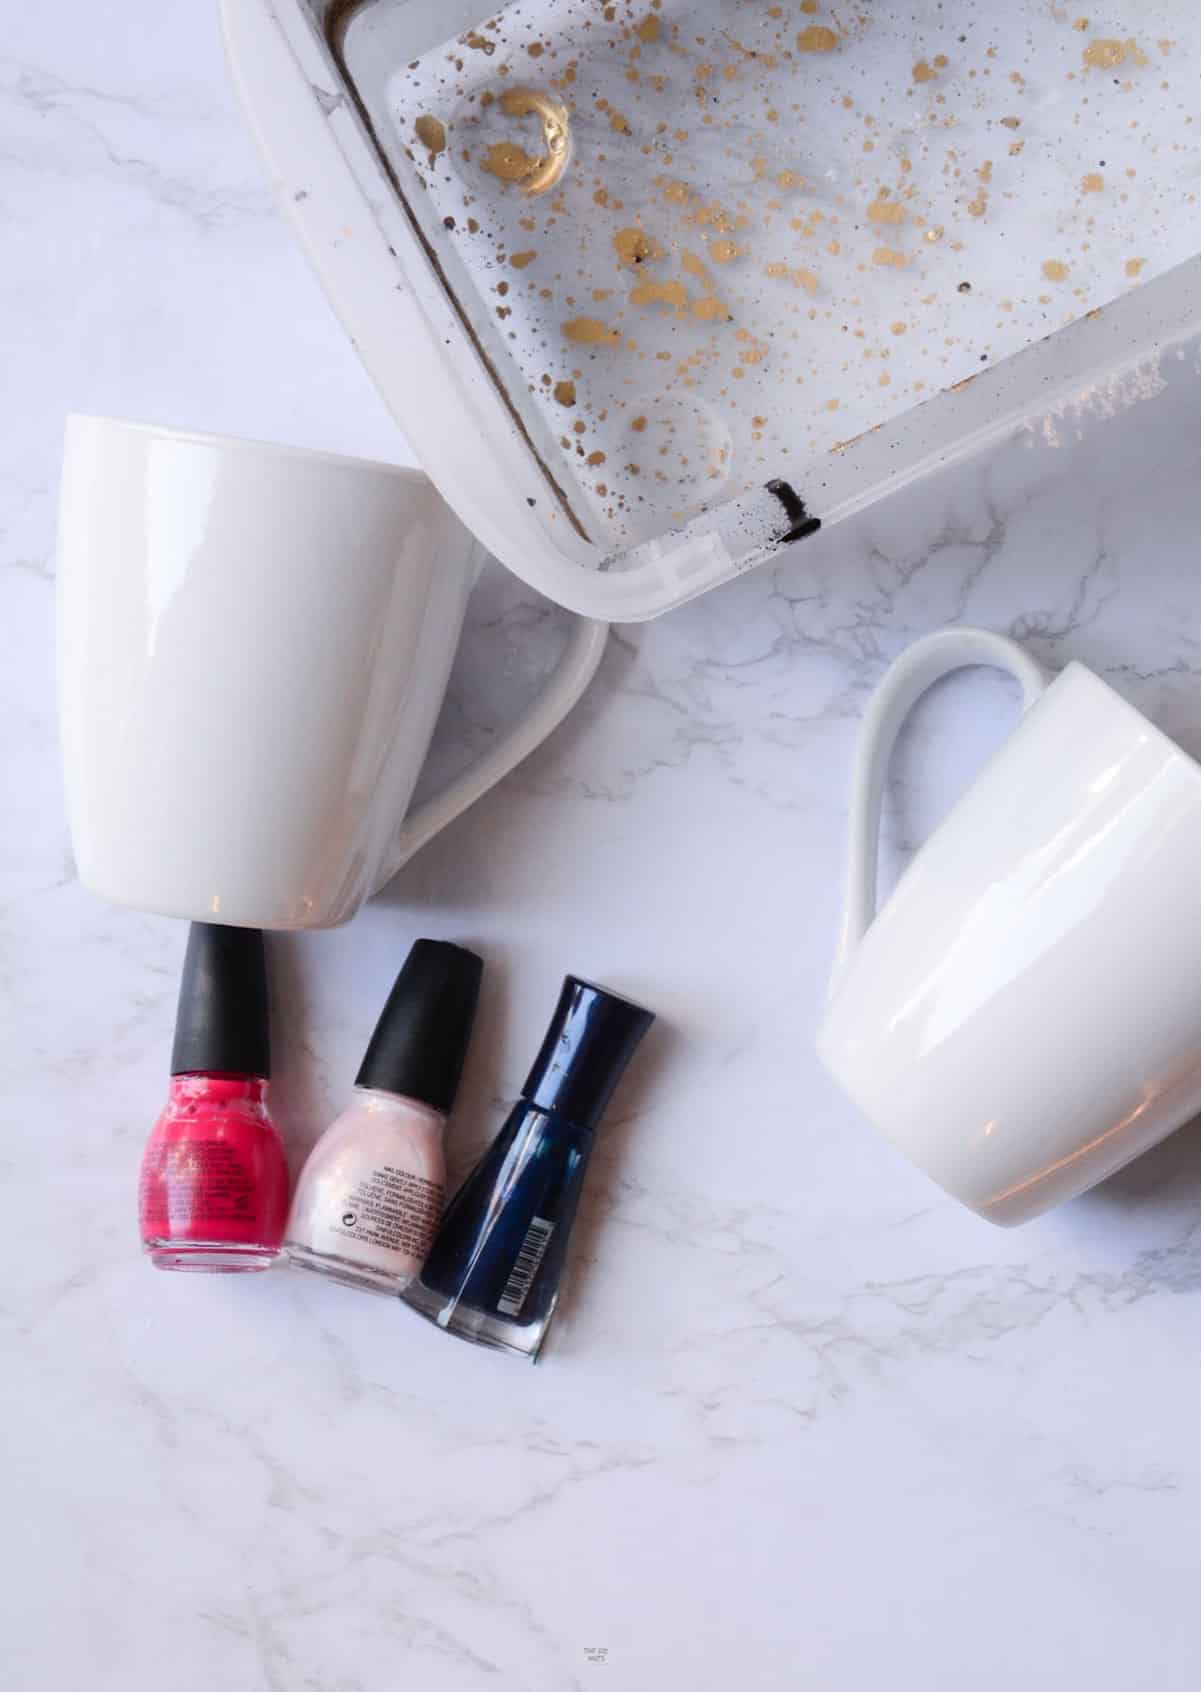 2 white ceramic mugs, nail polish and plastic container filled with water.